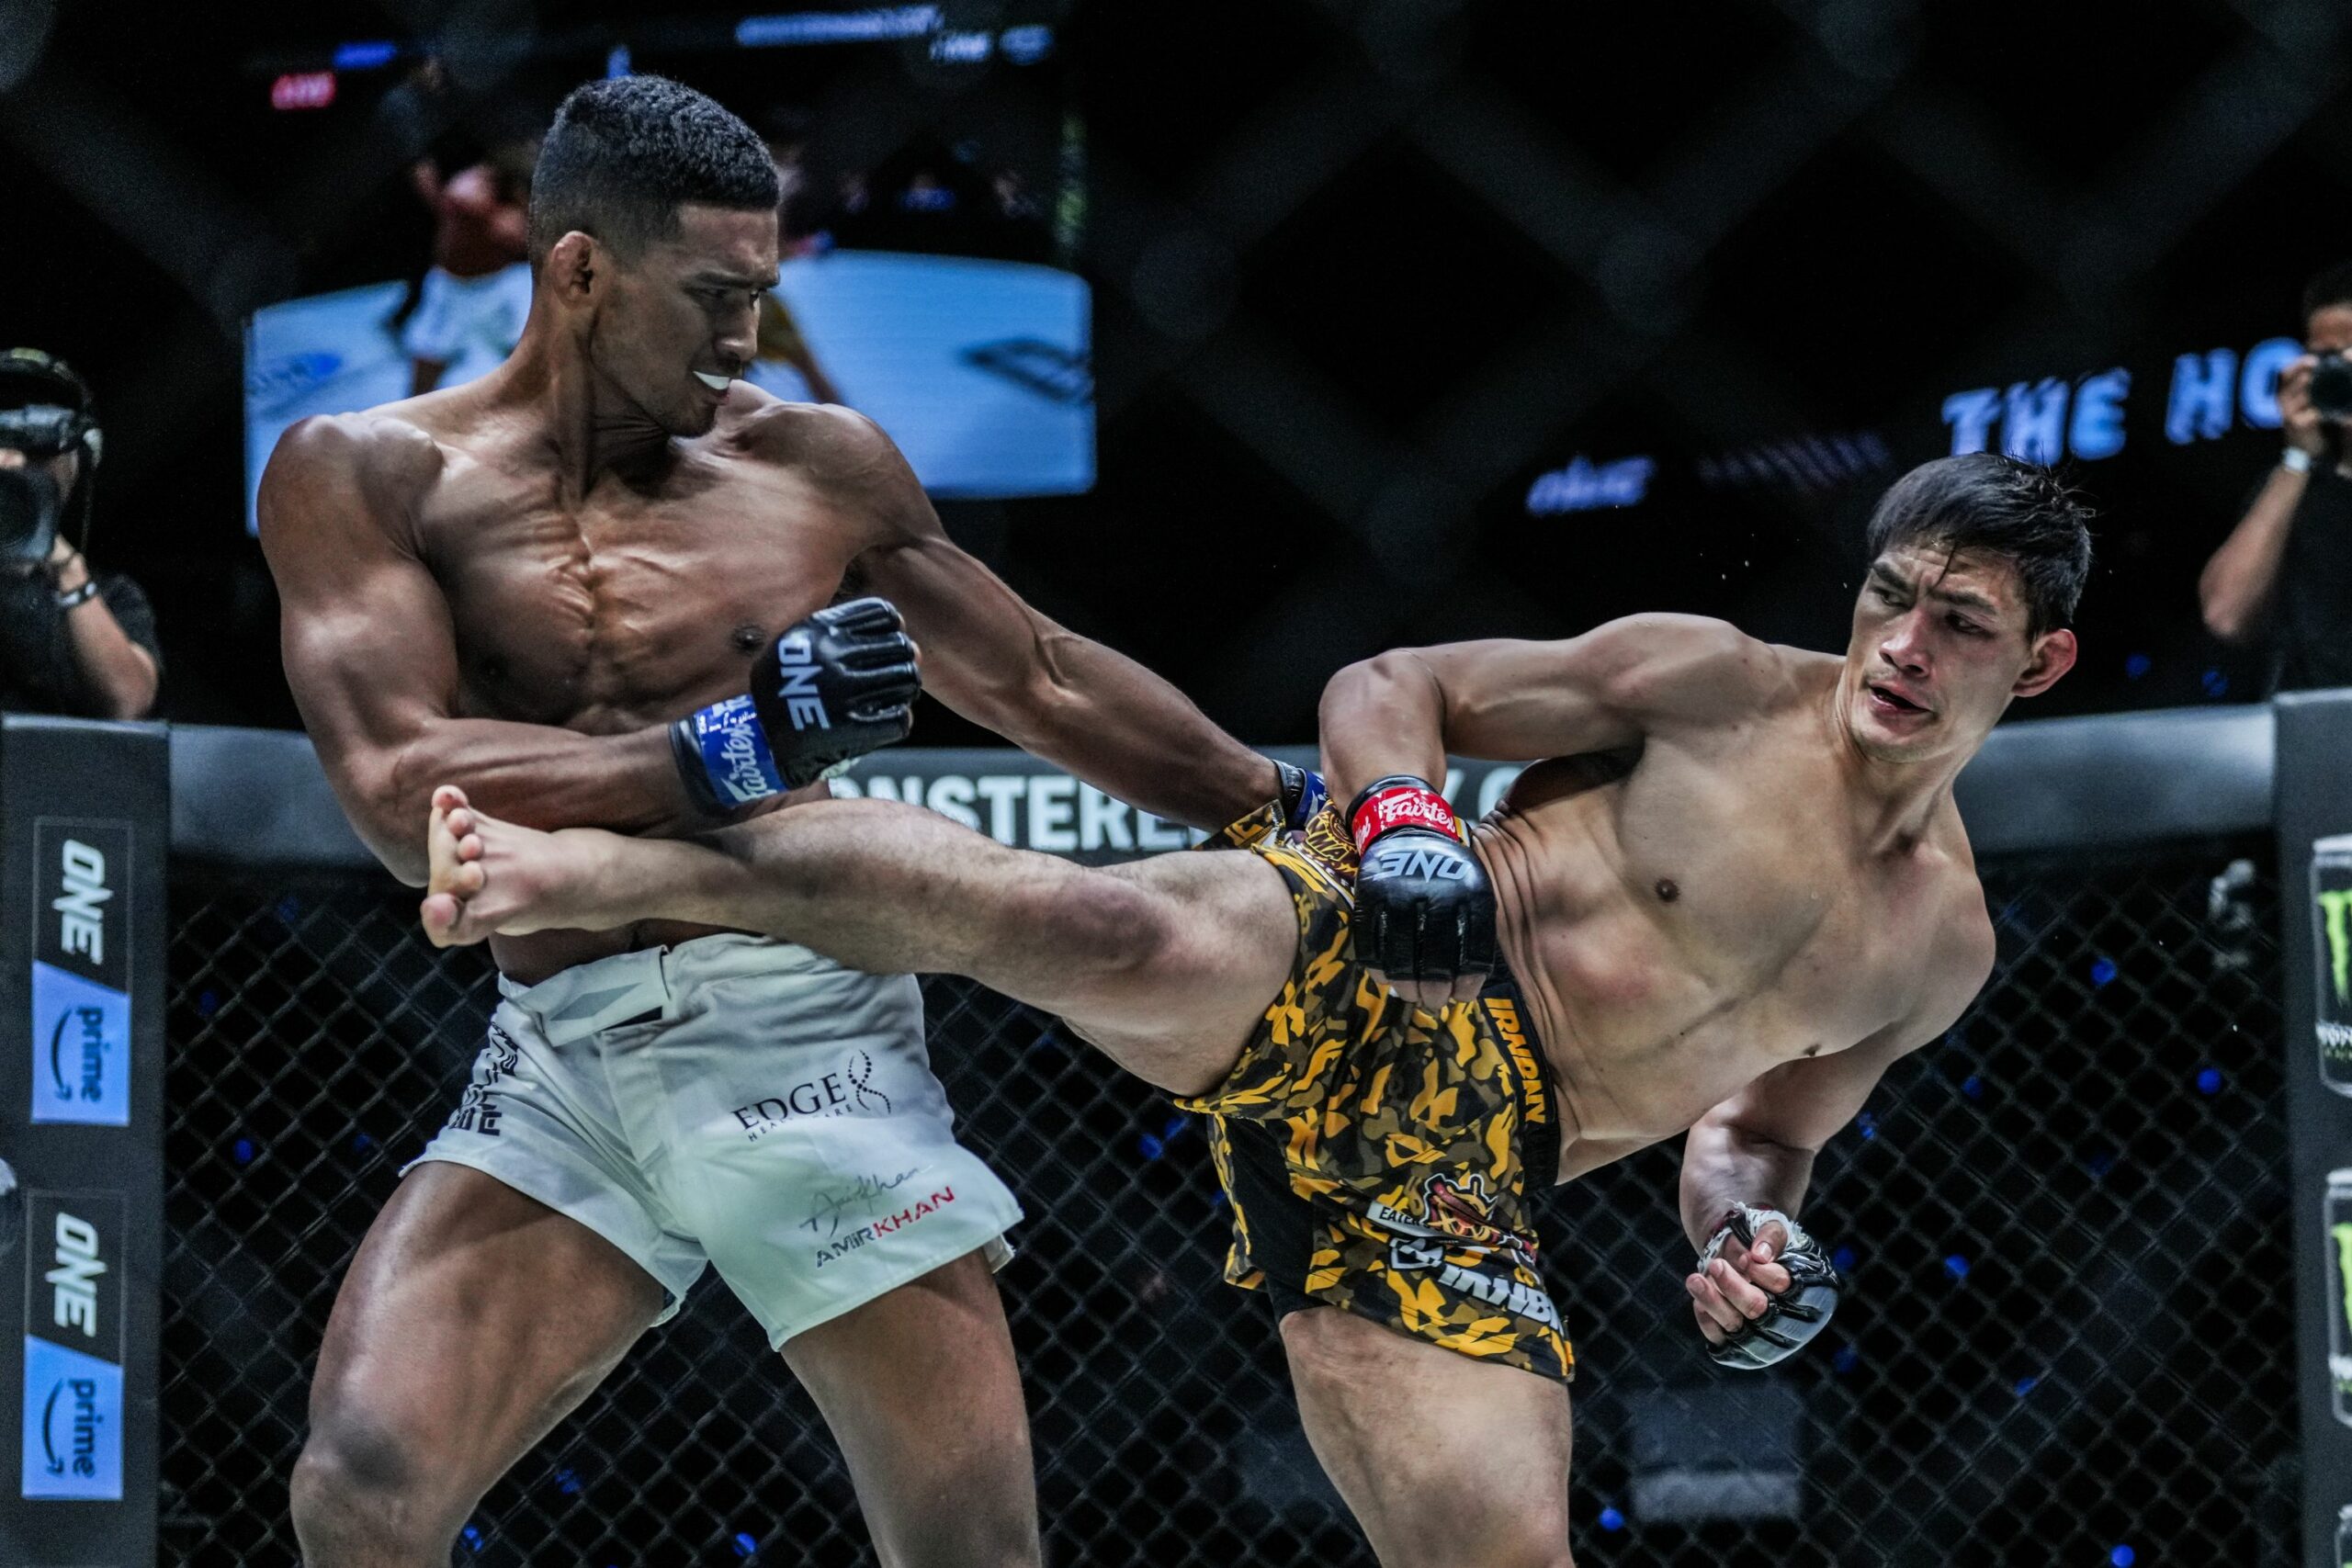 ONE-Fight-Night-14-Eduard-Folayang-def-Amir-Khan-scaled Eduard Folayang beats Amir Khan again at ONE Fight Night 14 Mixed Martial Arts News ONE Championship  - philippine sports news